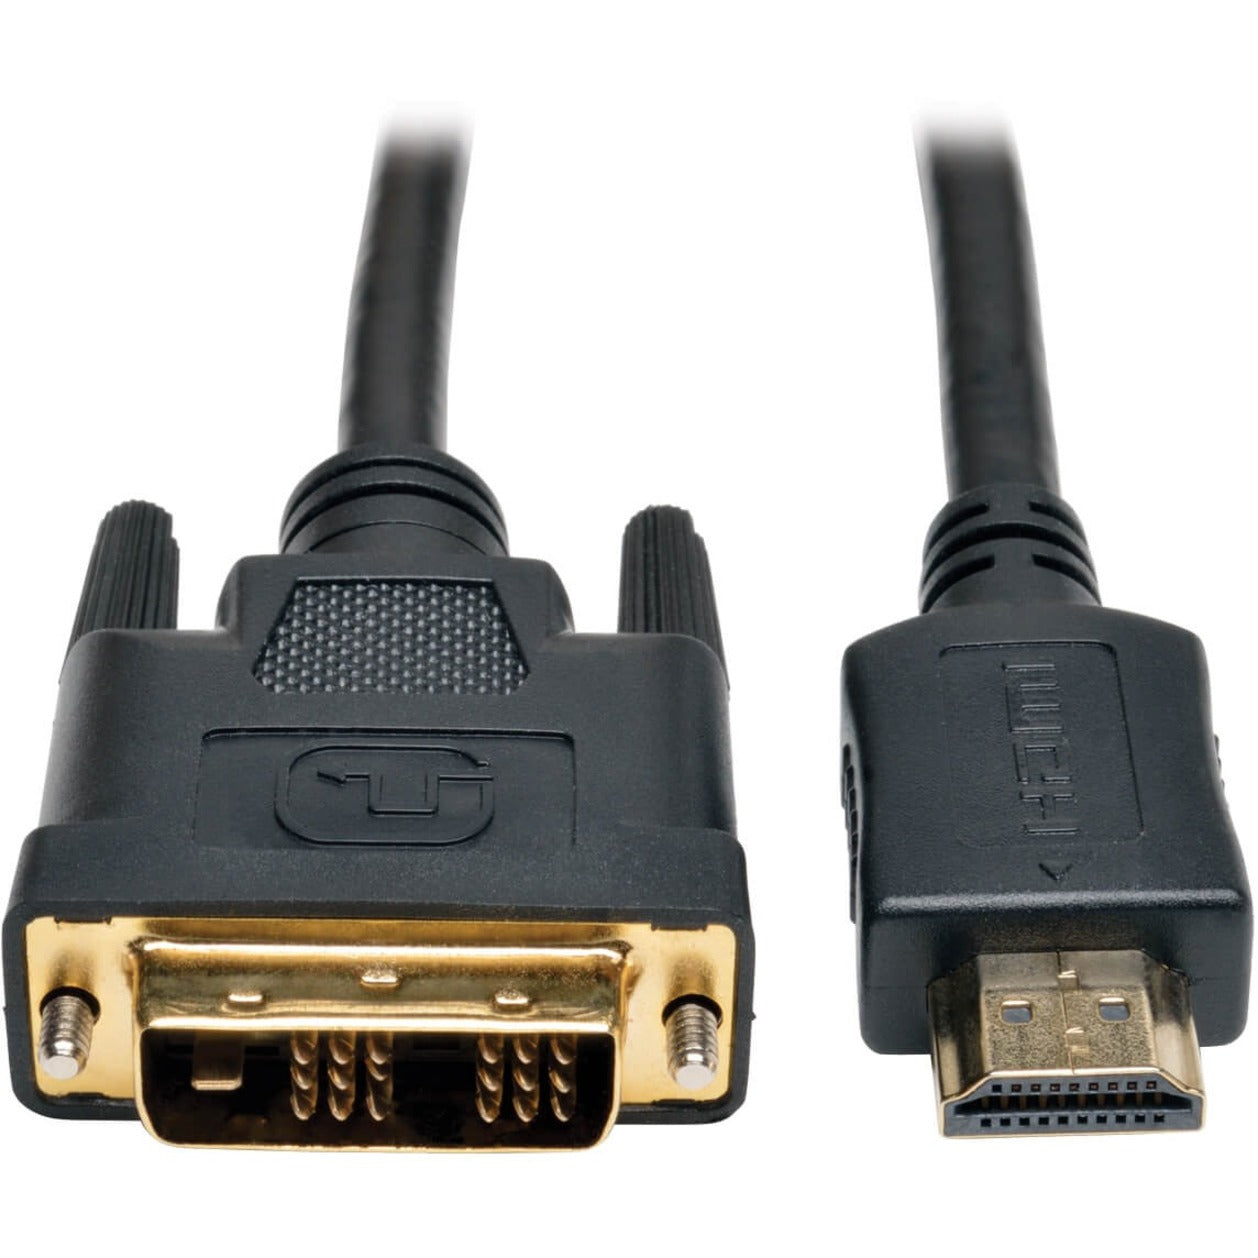 Tripp Lite P566-003 3-ft. HDMI to DVI Gold Digital Video Cable, Interference Protection, Crosstalk Protection, EMI/RF Protection